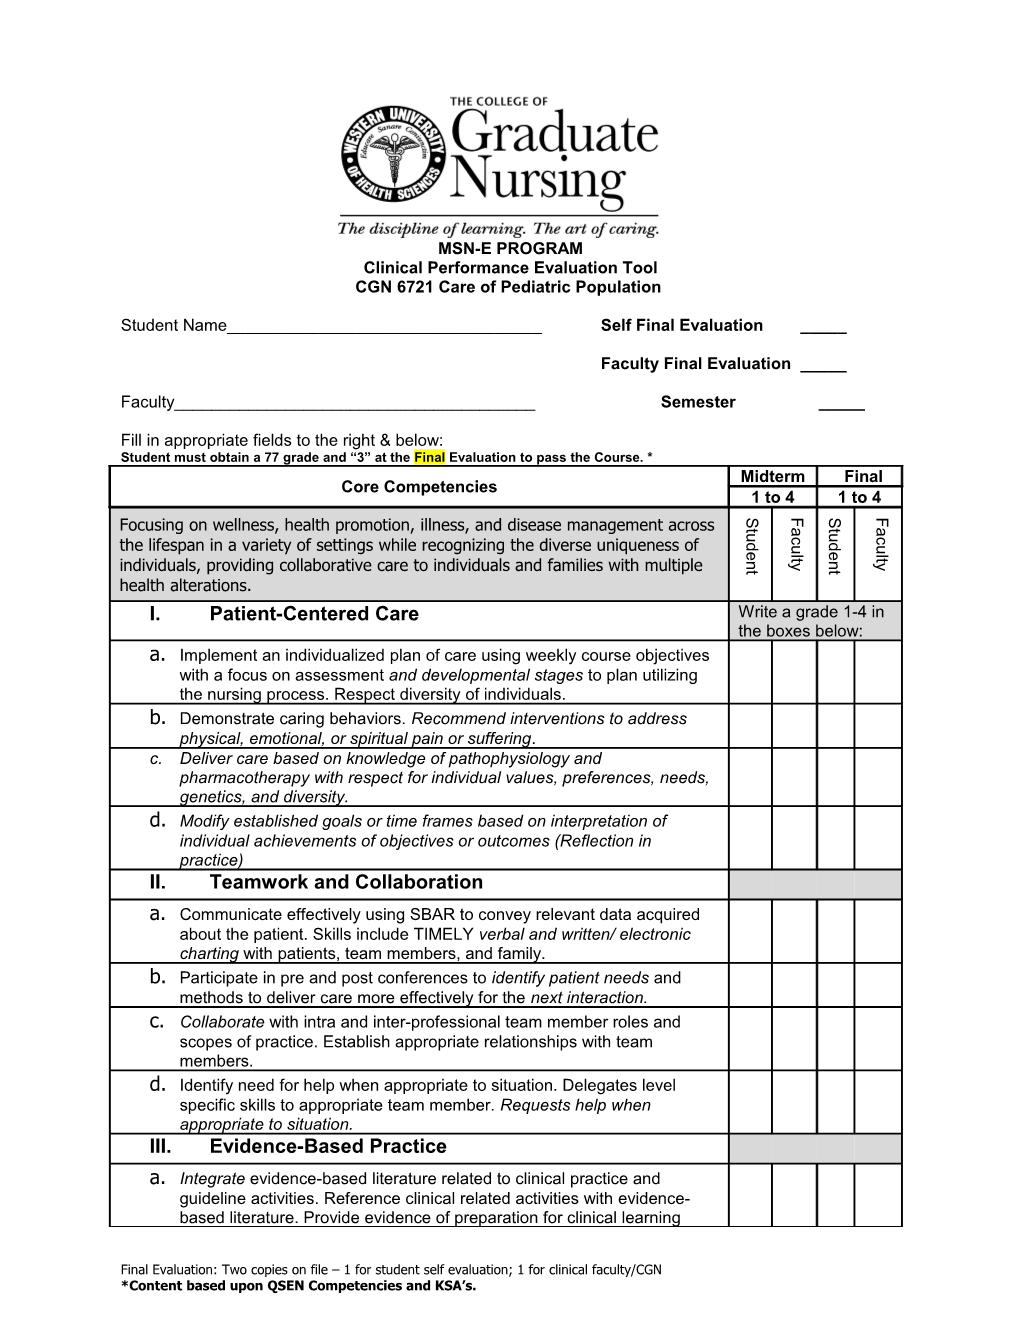 Clinical Performance Evaluation Tool s1